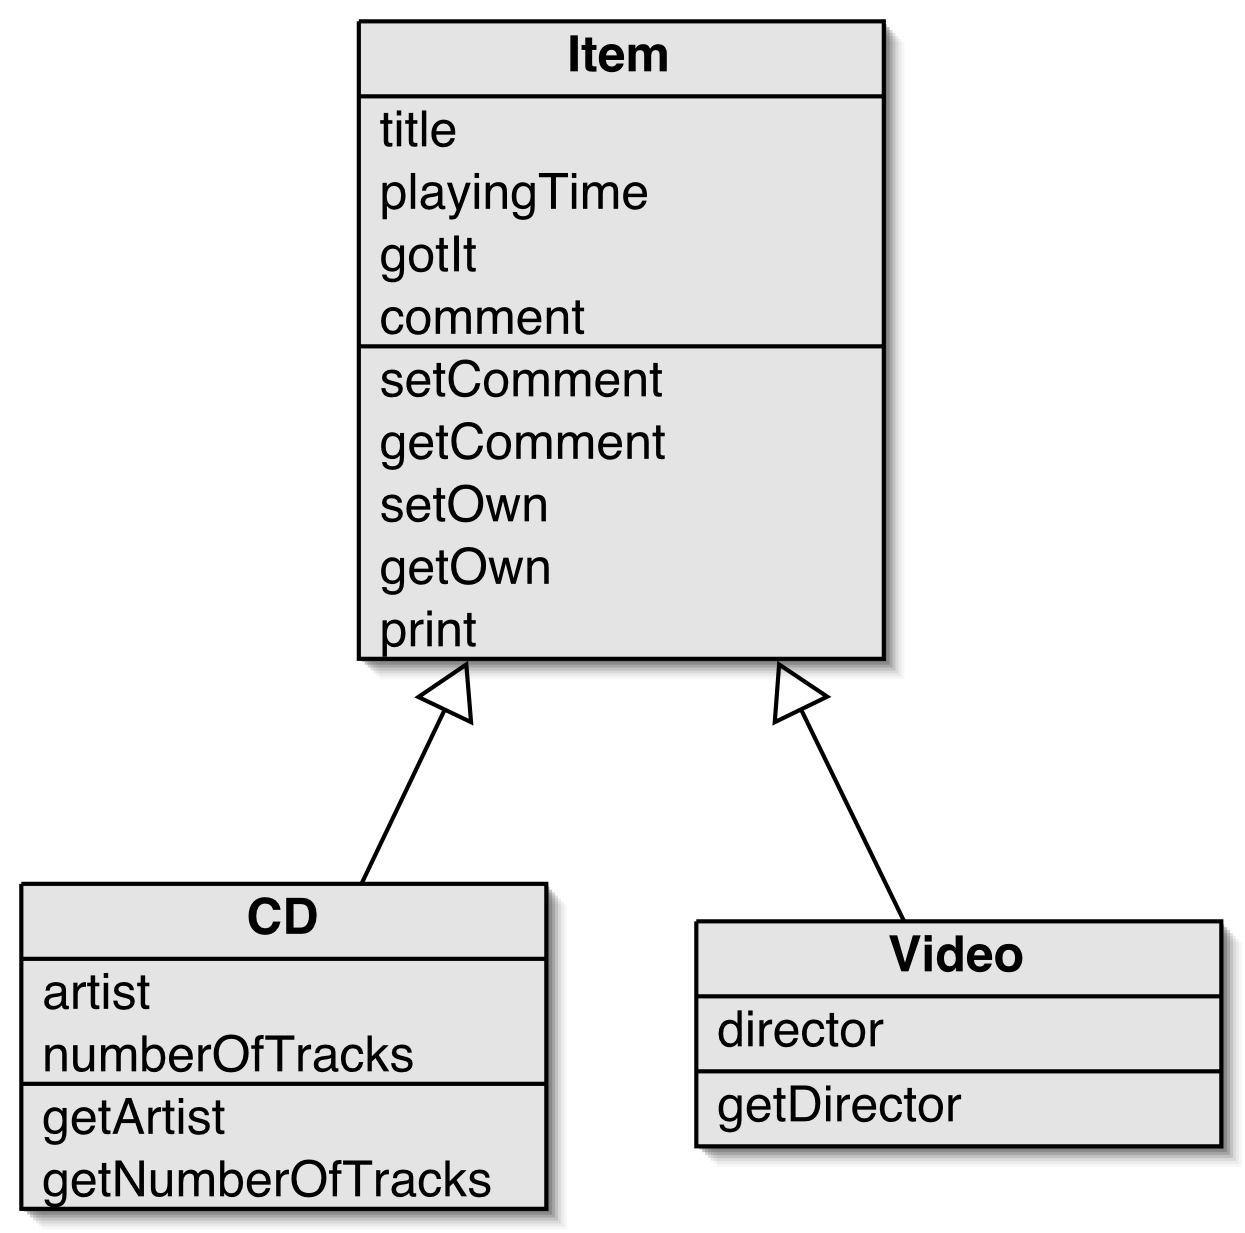 ) ] public class Video private String director; Video(String thetitle, String thedirect) director = thedirect; comment = " "; void setcomment(string newcomment) String getcomment() Objects First with